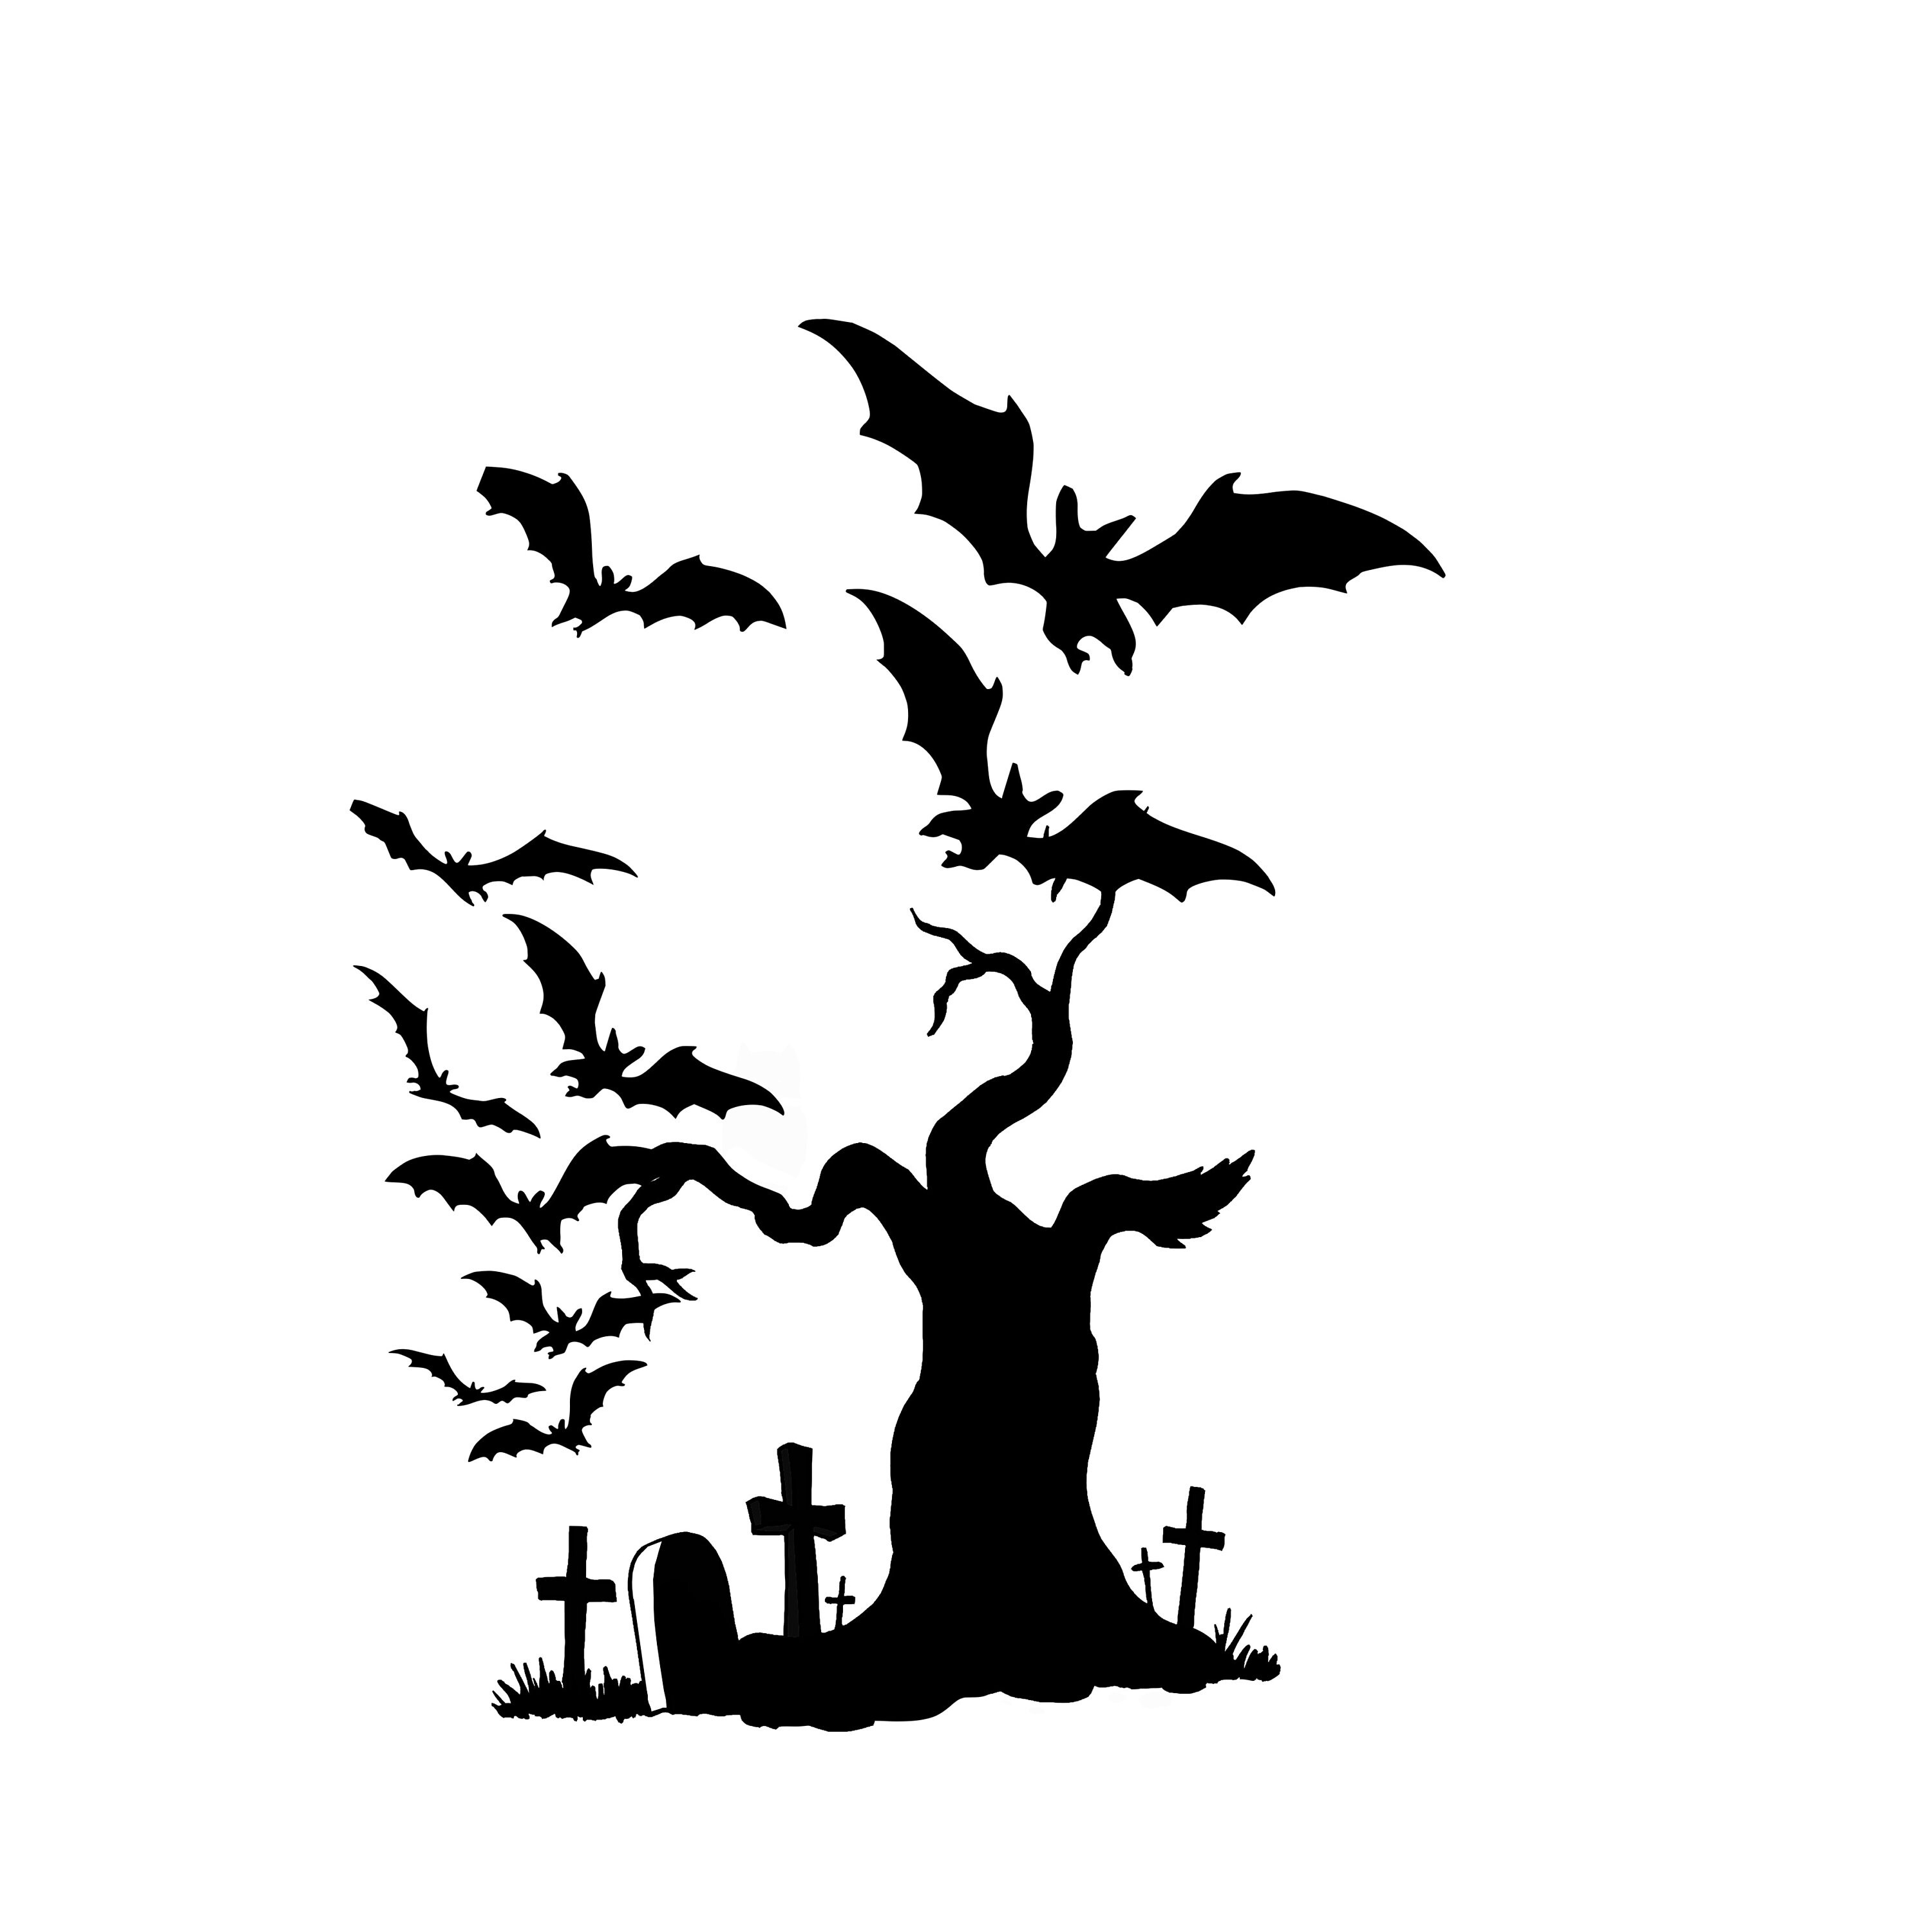 Halloween Rip Grave Bats Night Graveyard Svg Png Icon Free Download  (#556236) 